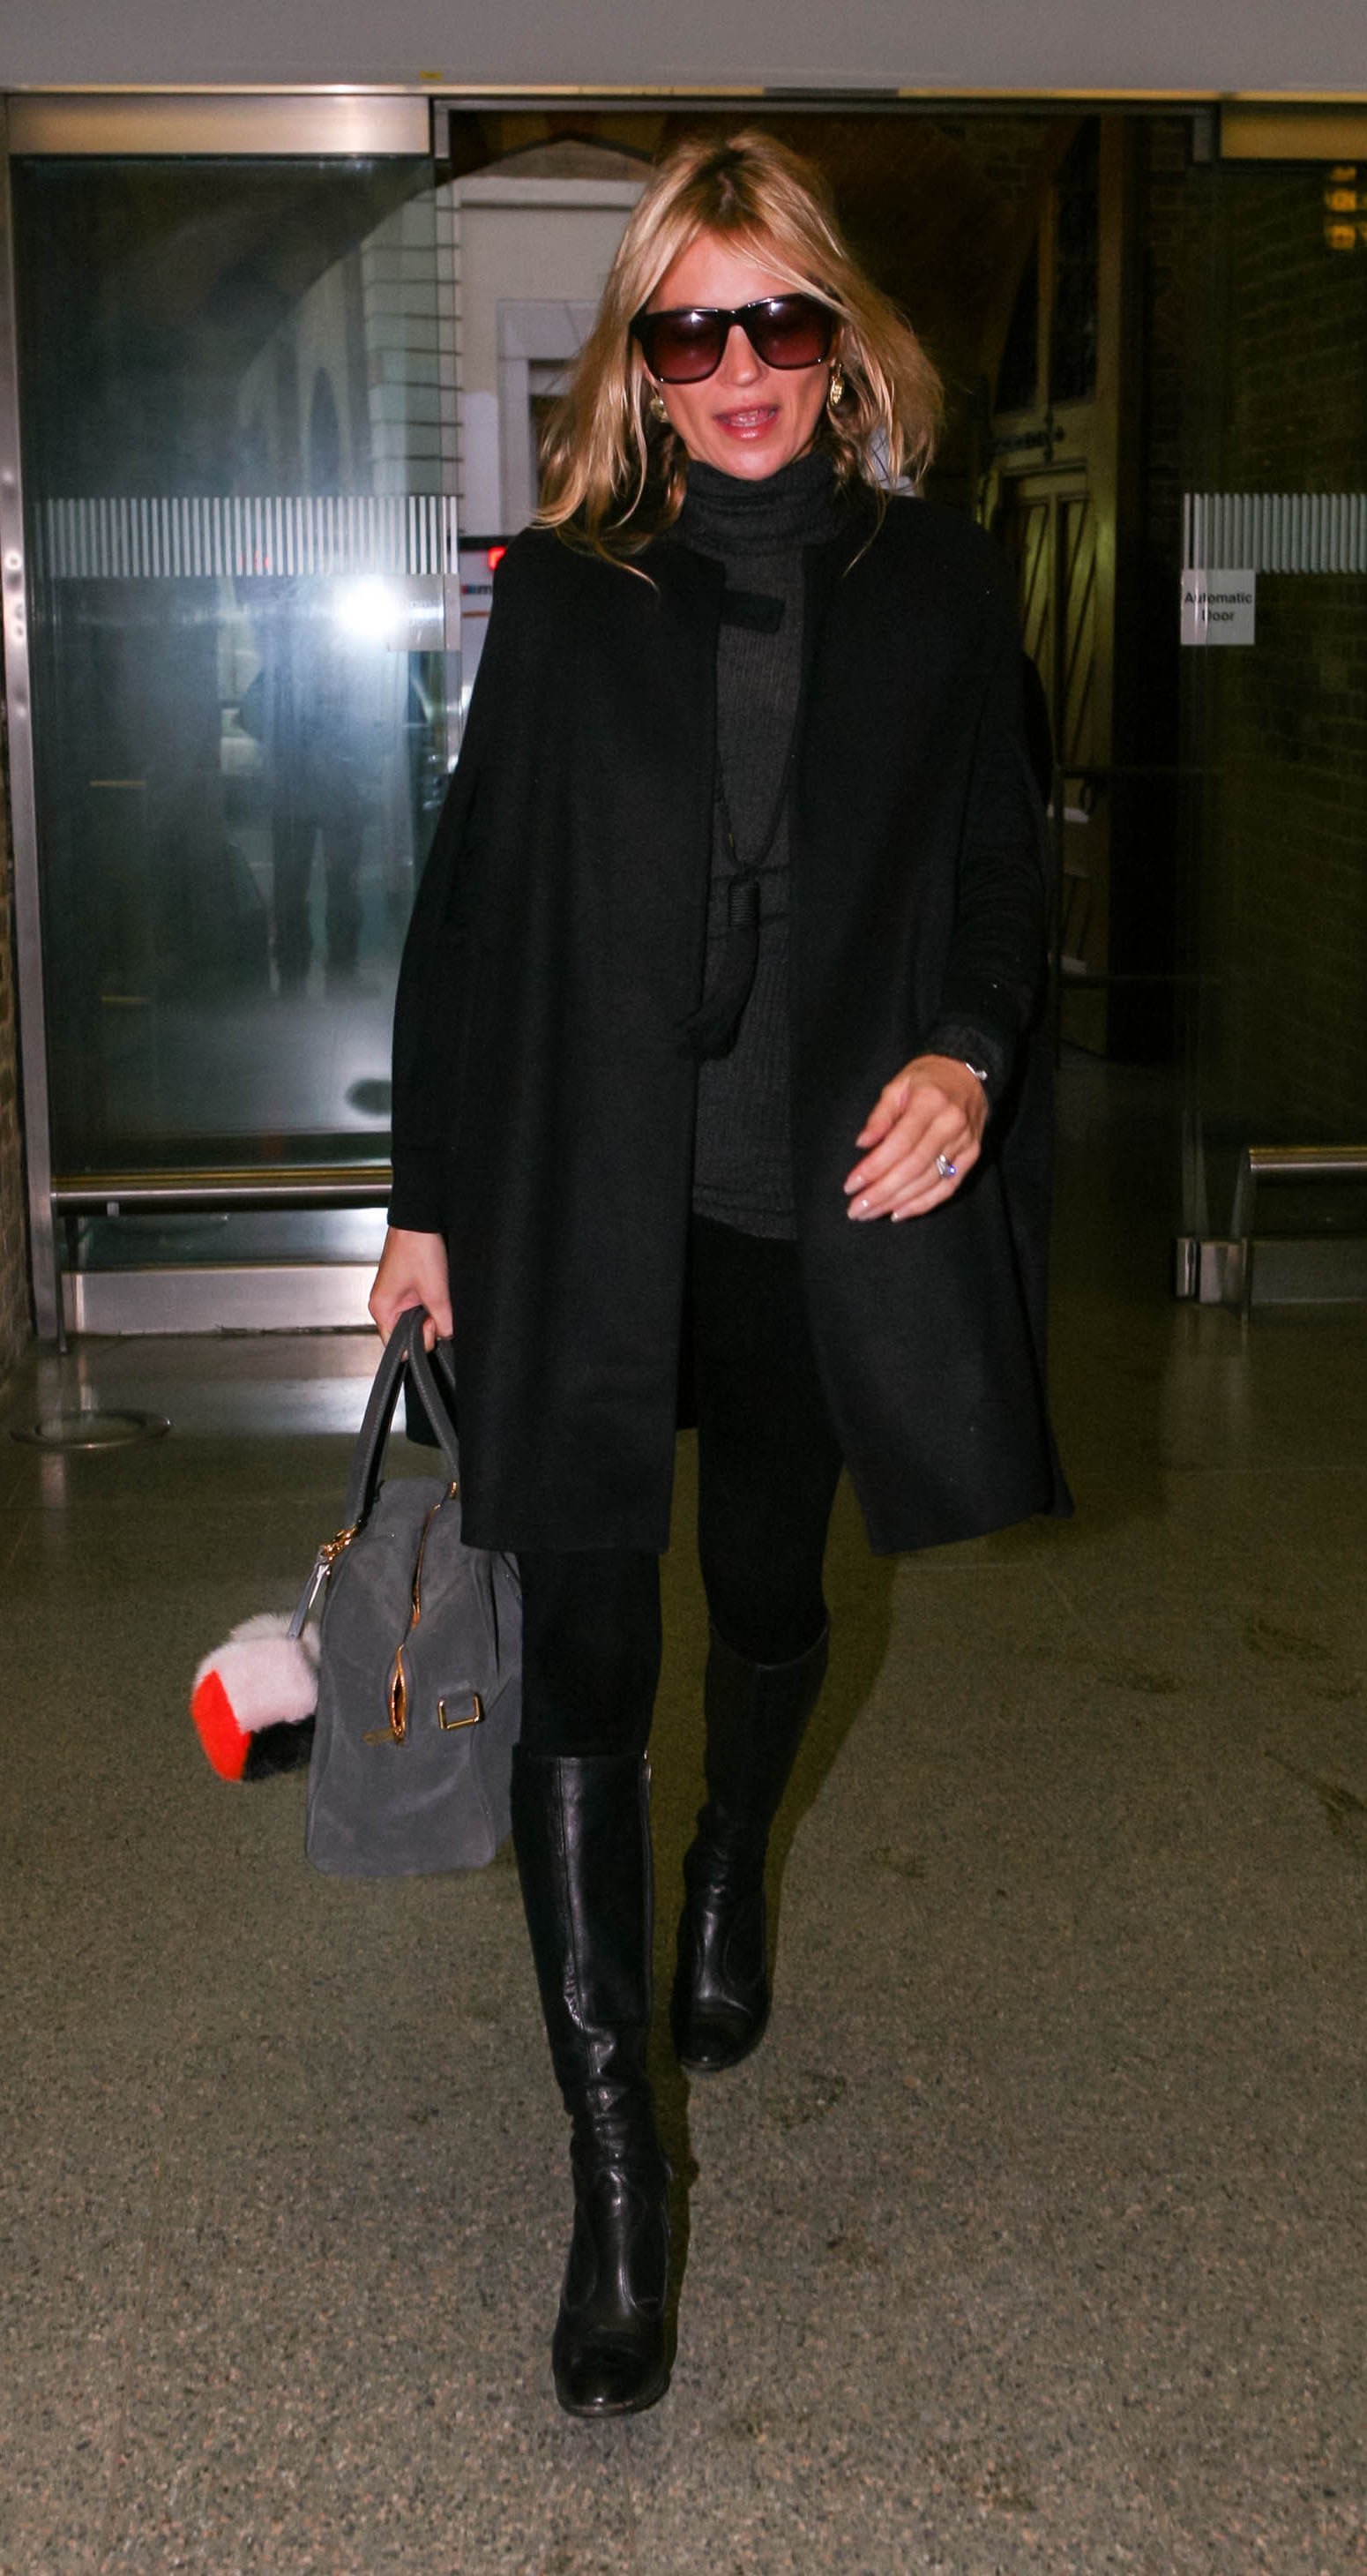 At the London Eurostar Terminal, en route to Paris, Kate looked polished and chic in all black, including knee-high boots and a peacoat.